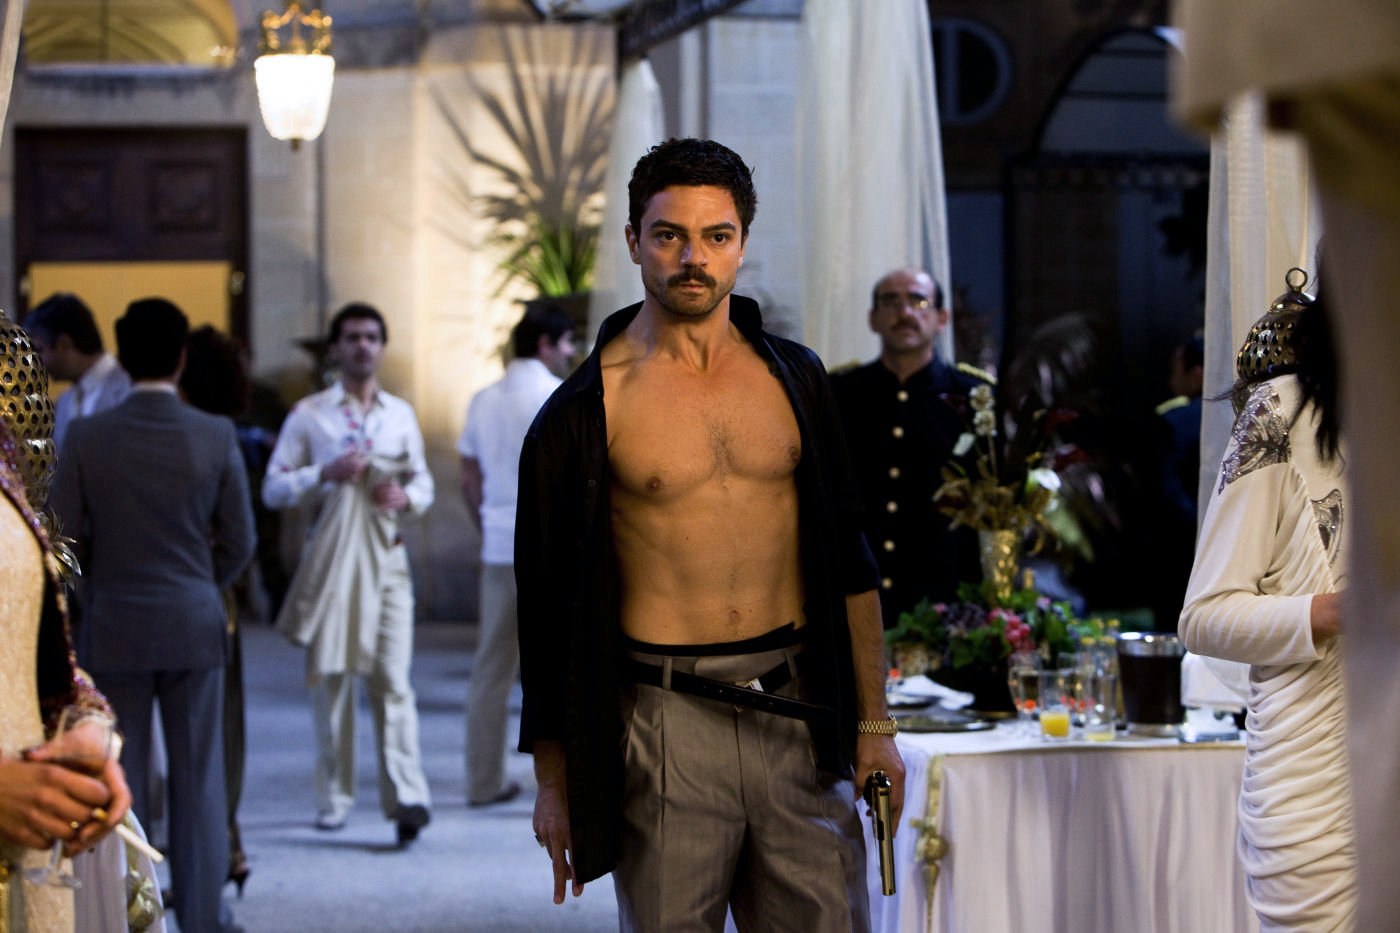 Dominic Cooper stars as Latif Yahia/Uday Hussein in Lionsgate Films' The Devil's Double (2011)